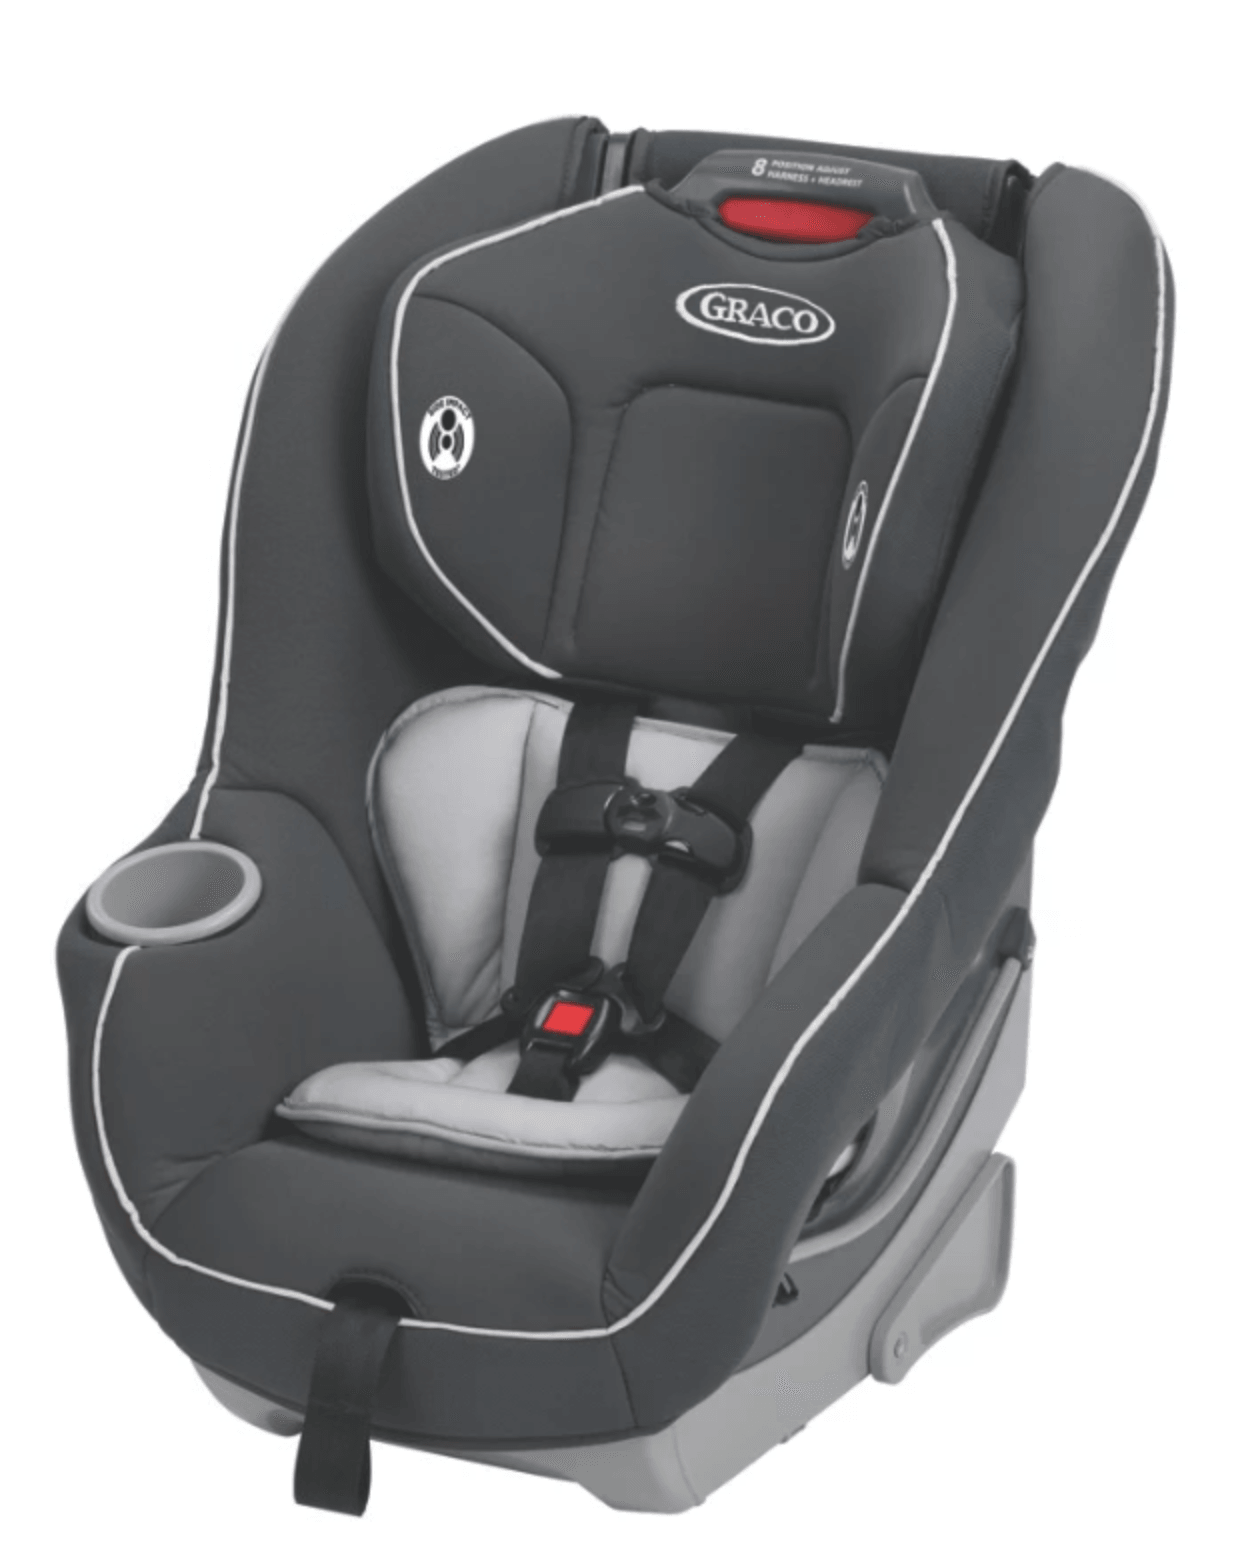 Contender™ 65 Convertible Car Seat - The Baby's Room